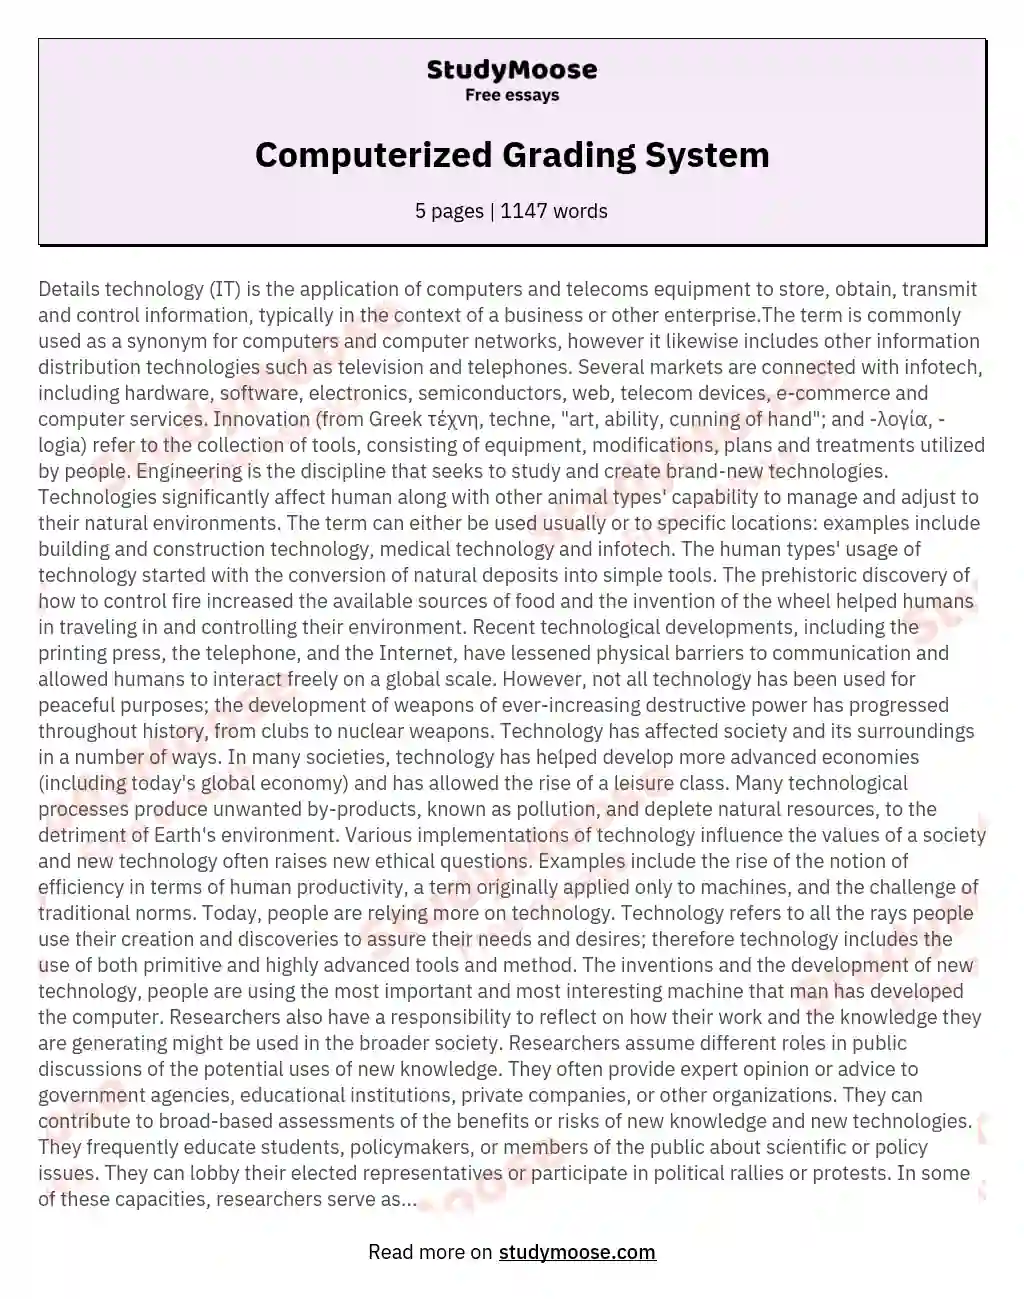 Computerized Grading System